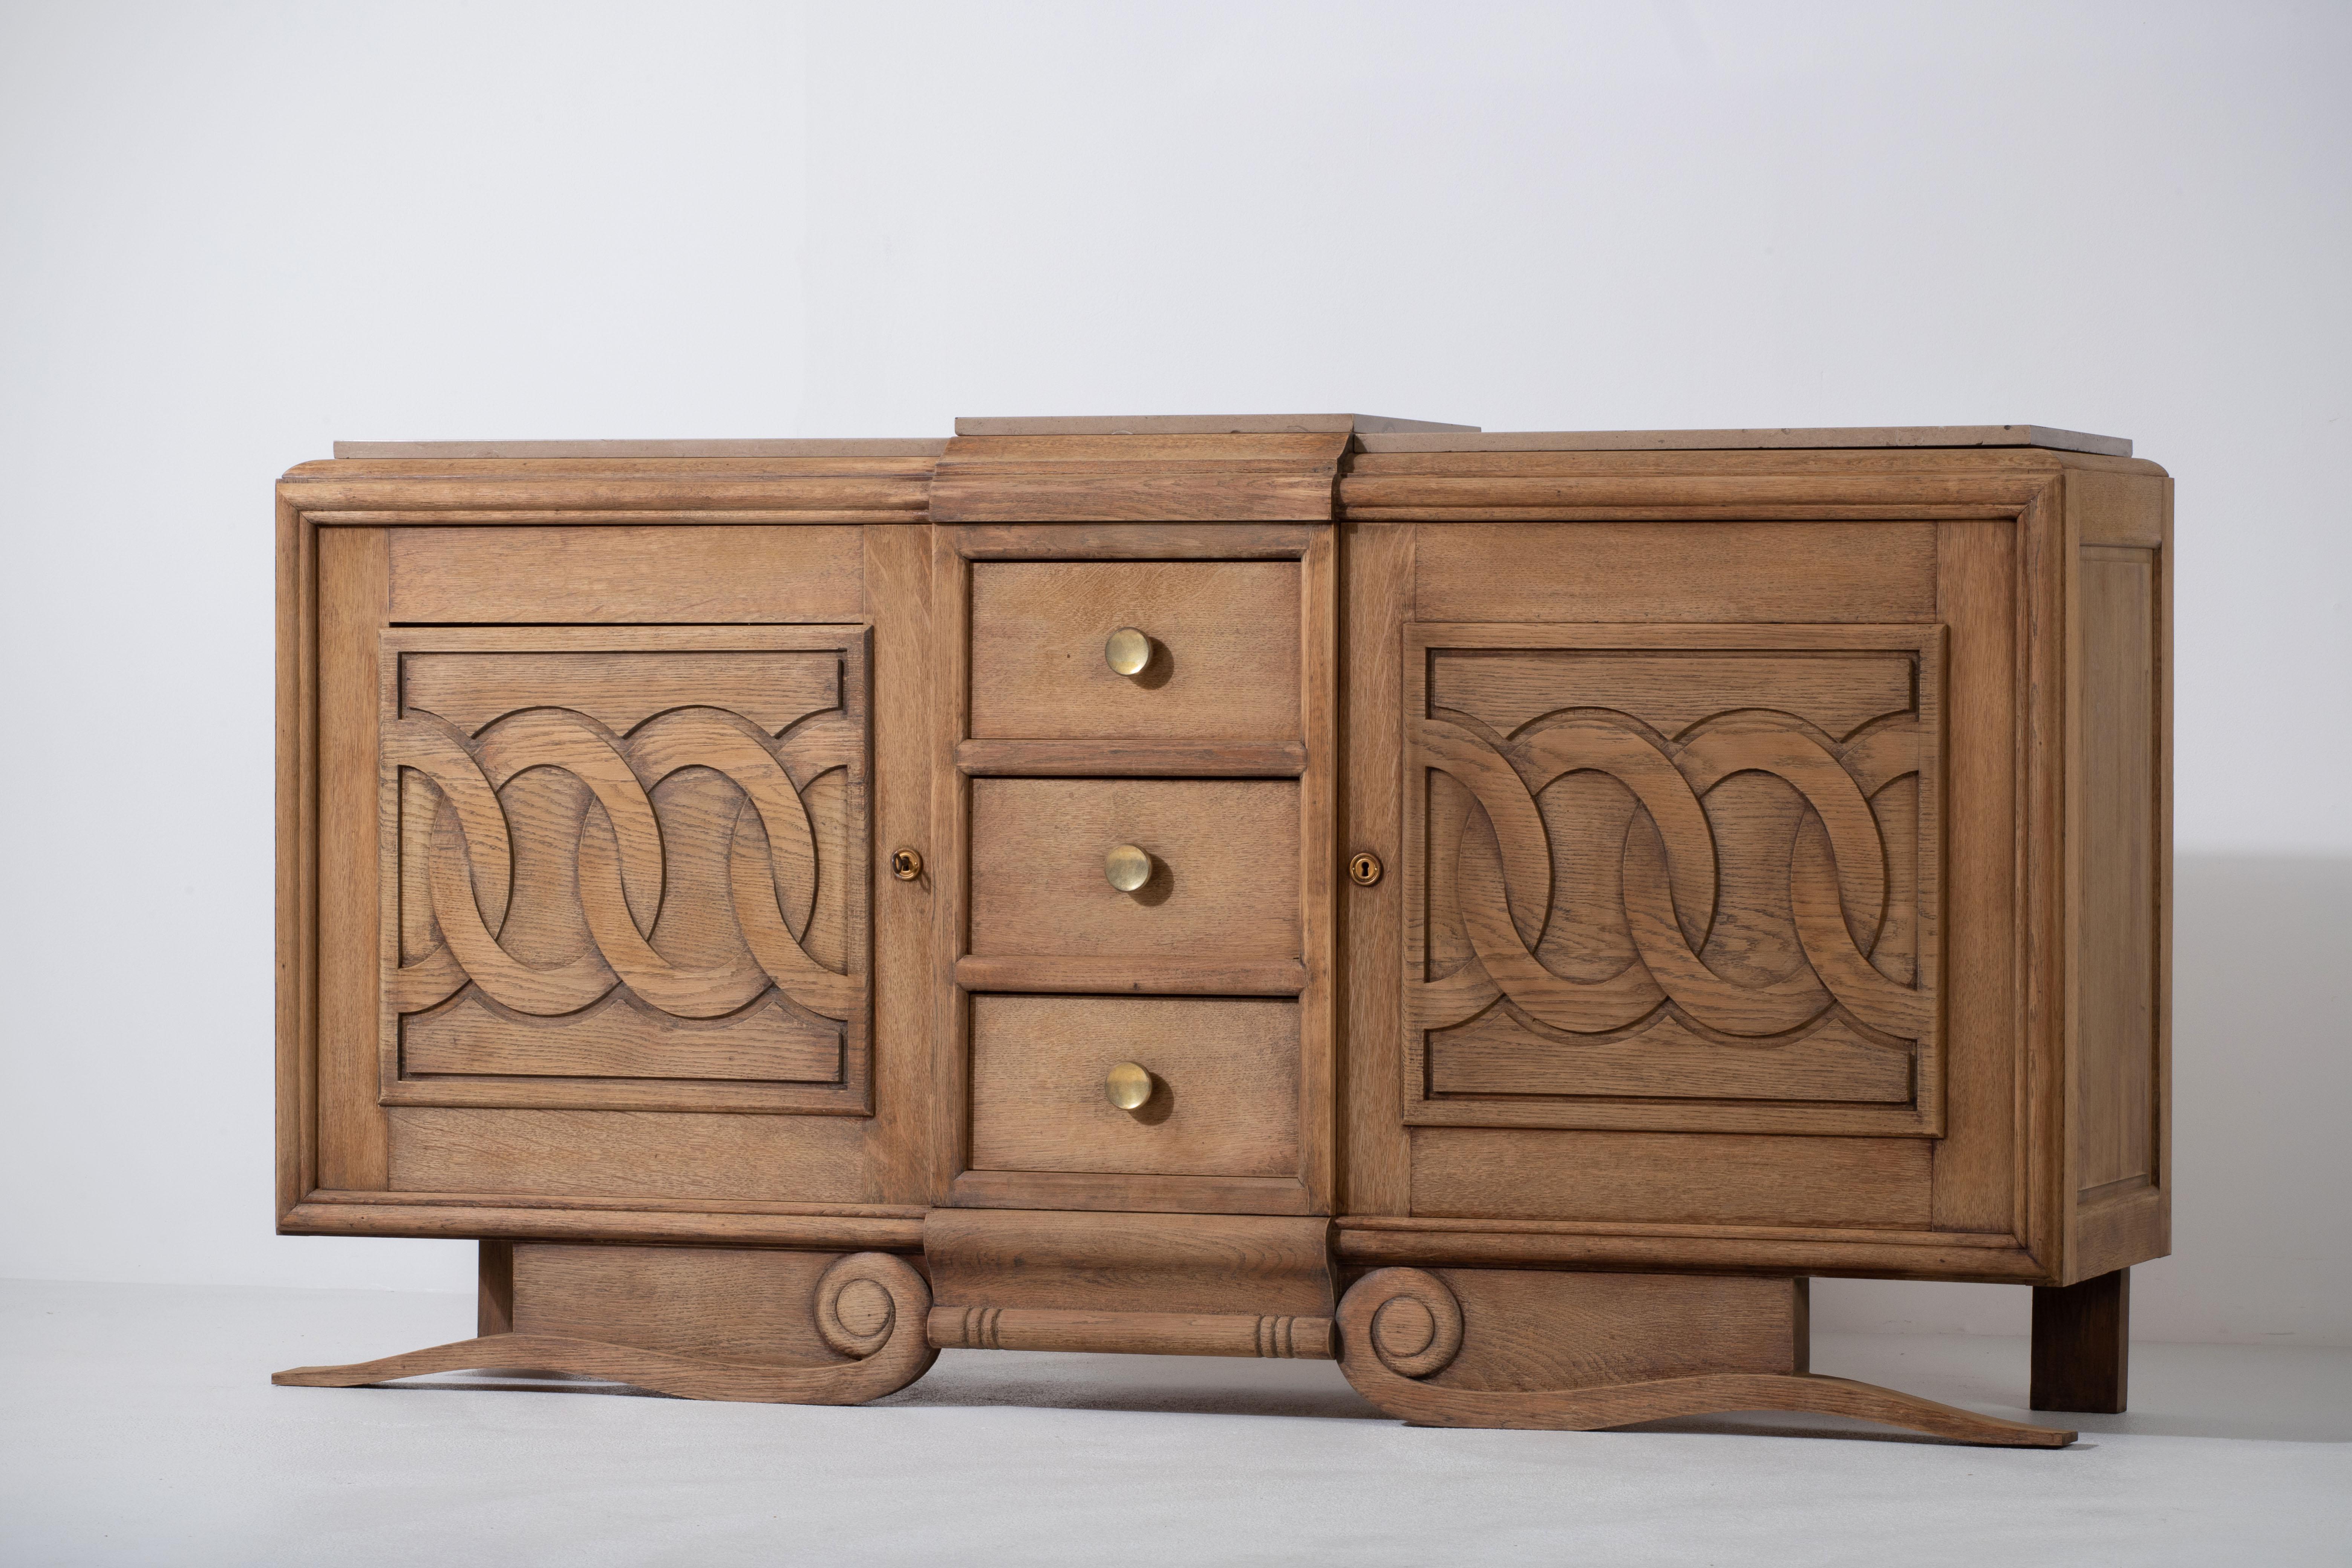 Credenza, solid oak, France, 1940s.
Art Deco brutalist sideboard. 
The credenza consists of two storage facilities and covered with very detailed designed doors and in the center, a drawers column.